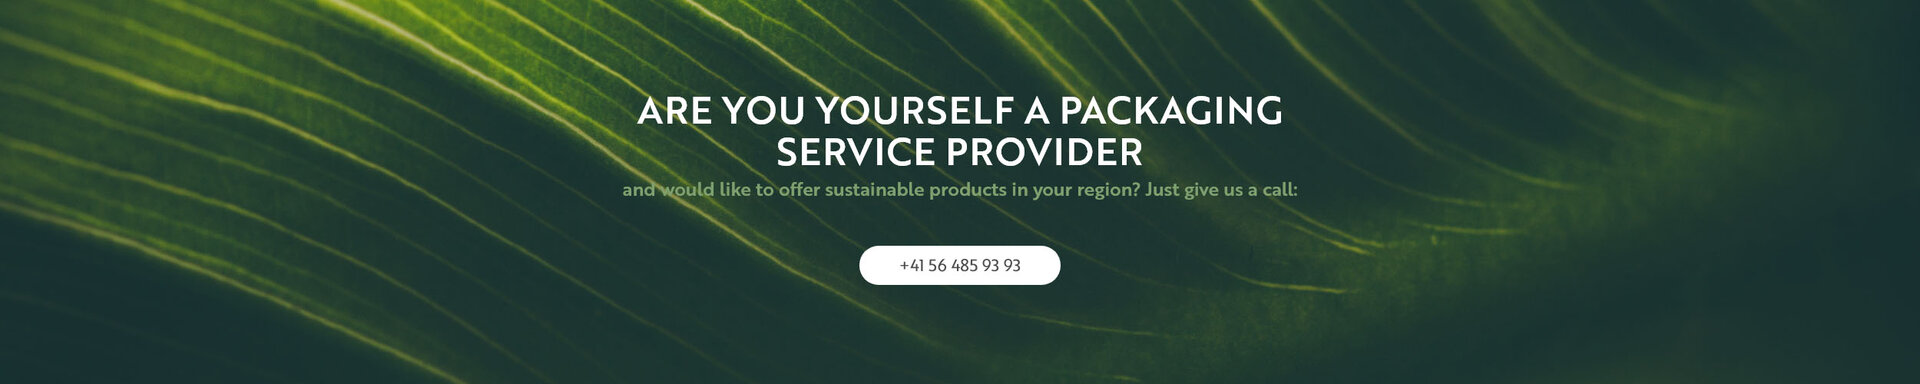 Are you yourself a packaging service provider?